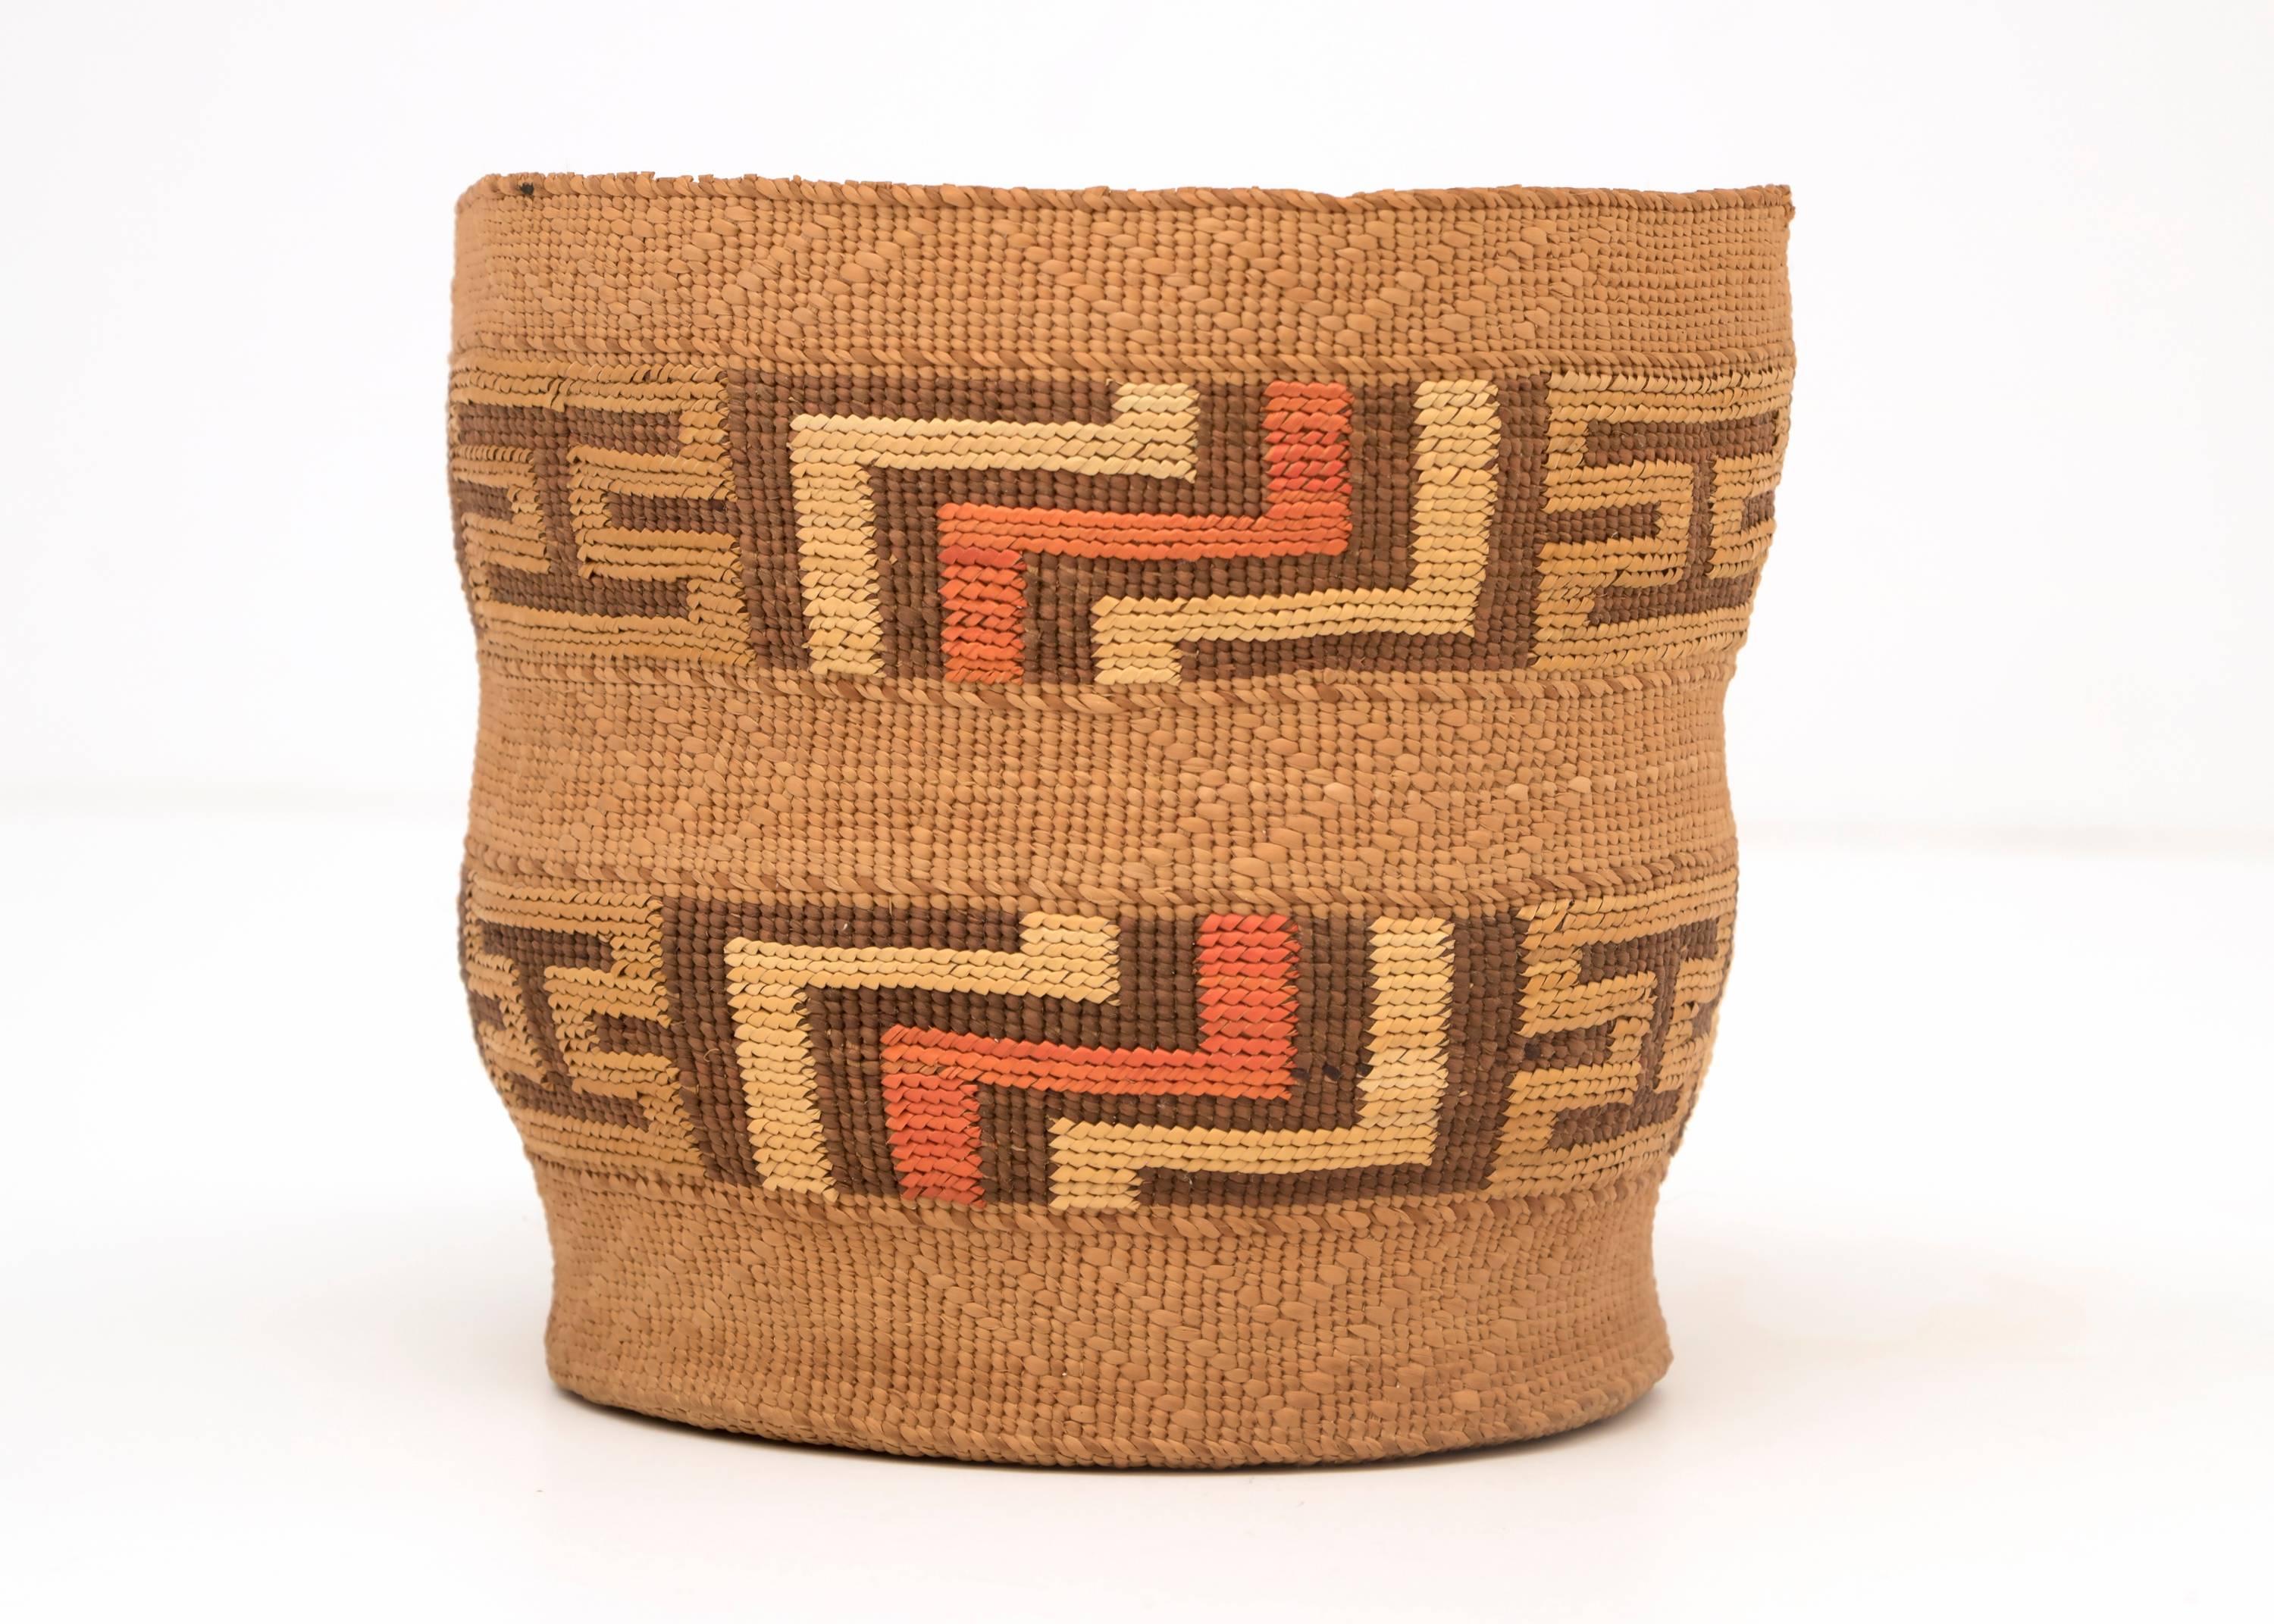 A flat bottomed cylindrical berry basket with a very fine weave with Classic Tlingit geometric false embroidery designs.

The Tlingit peoples are indigenous to the Pacific Northwest Coast; inhabiting southeastern Alaska, portions of British